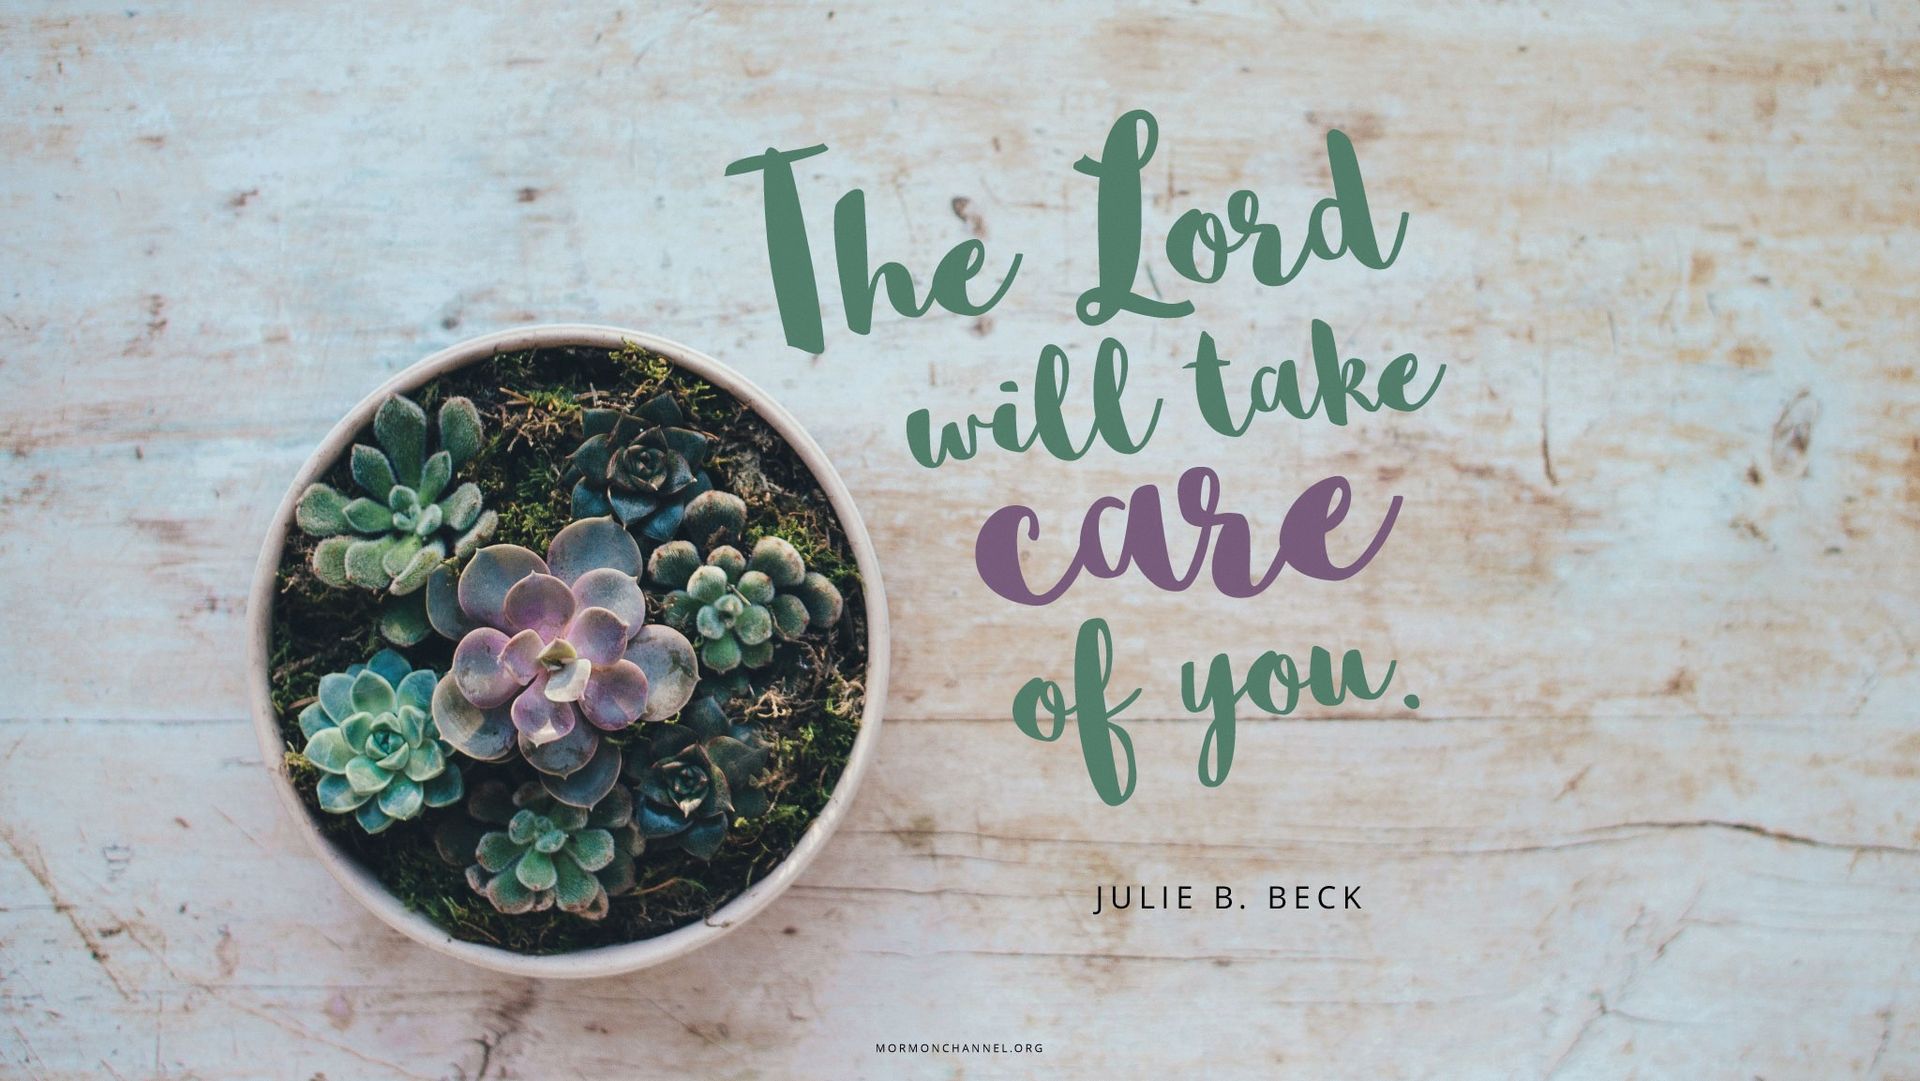 “The Lord will take care of you.”—Sister Julie B. Beck, “There Is Hope Smiling Brightly before Us” © undefined ipCode 1.